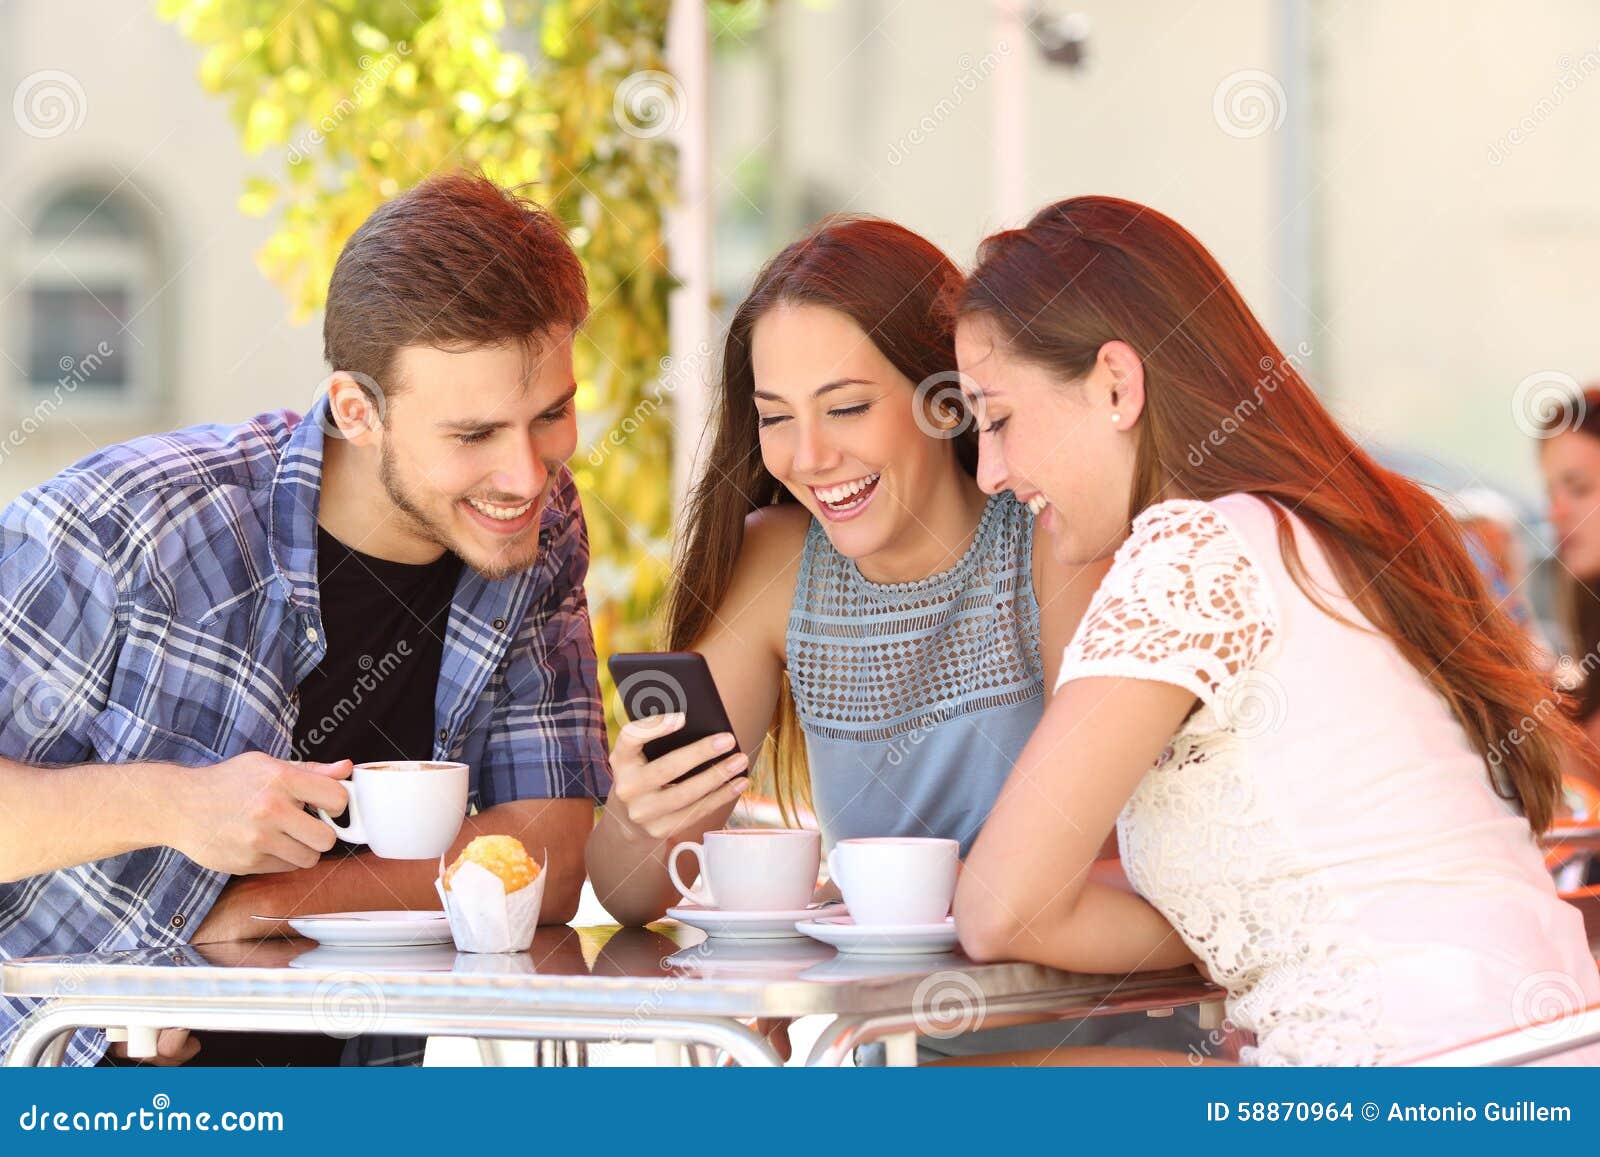 friends watching media in a smart phone in a coffee shop